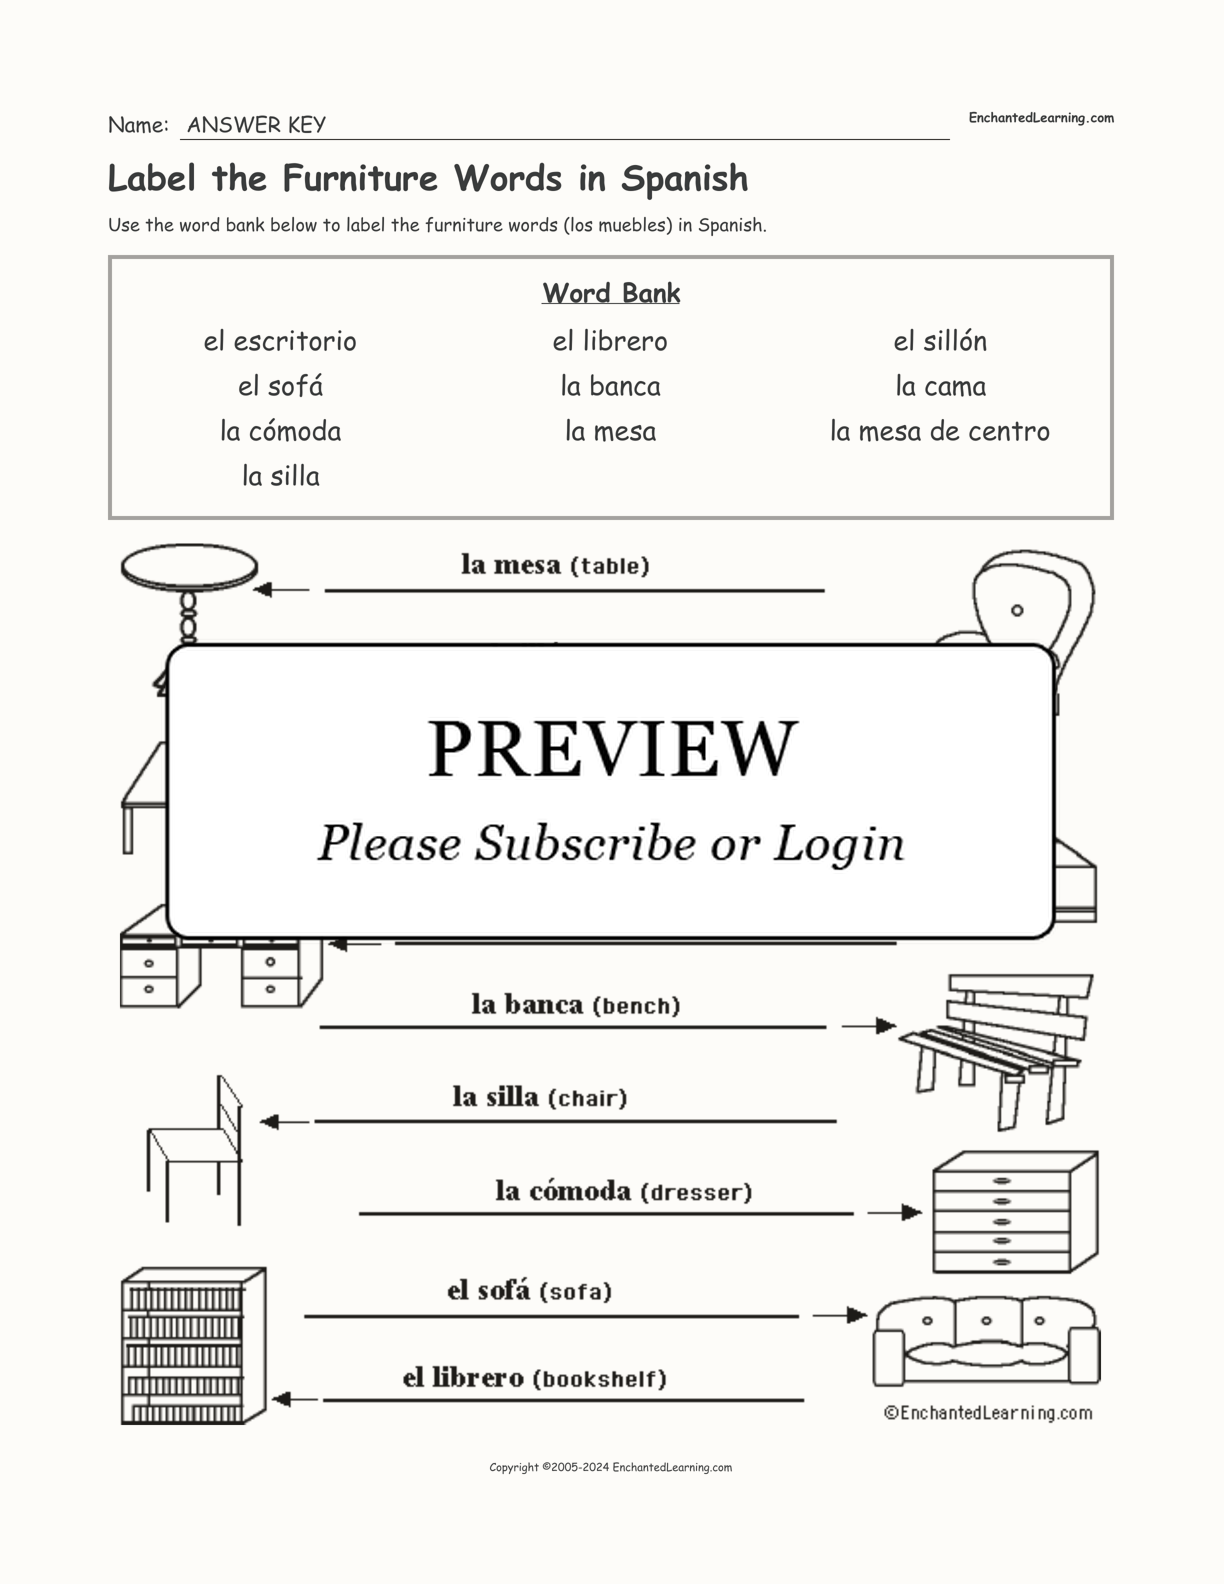 Label the Furniture Words in Spanish interactive worksheet page 2